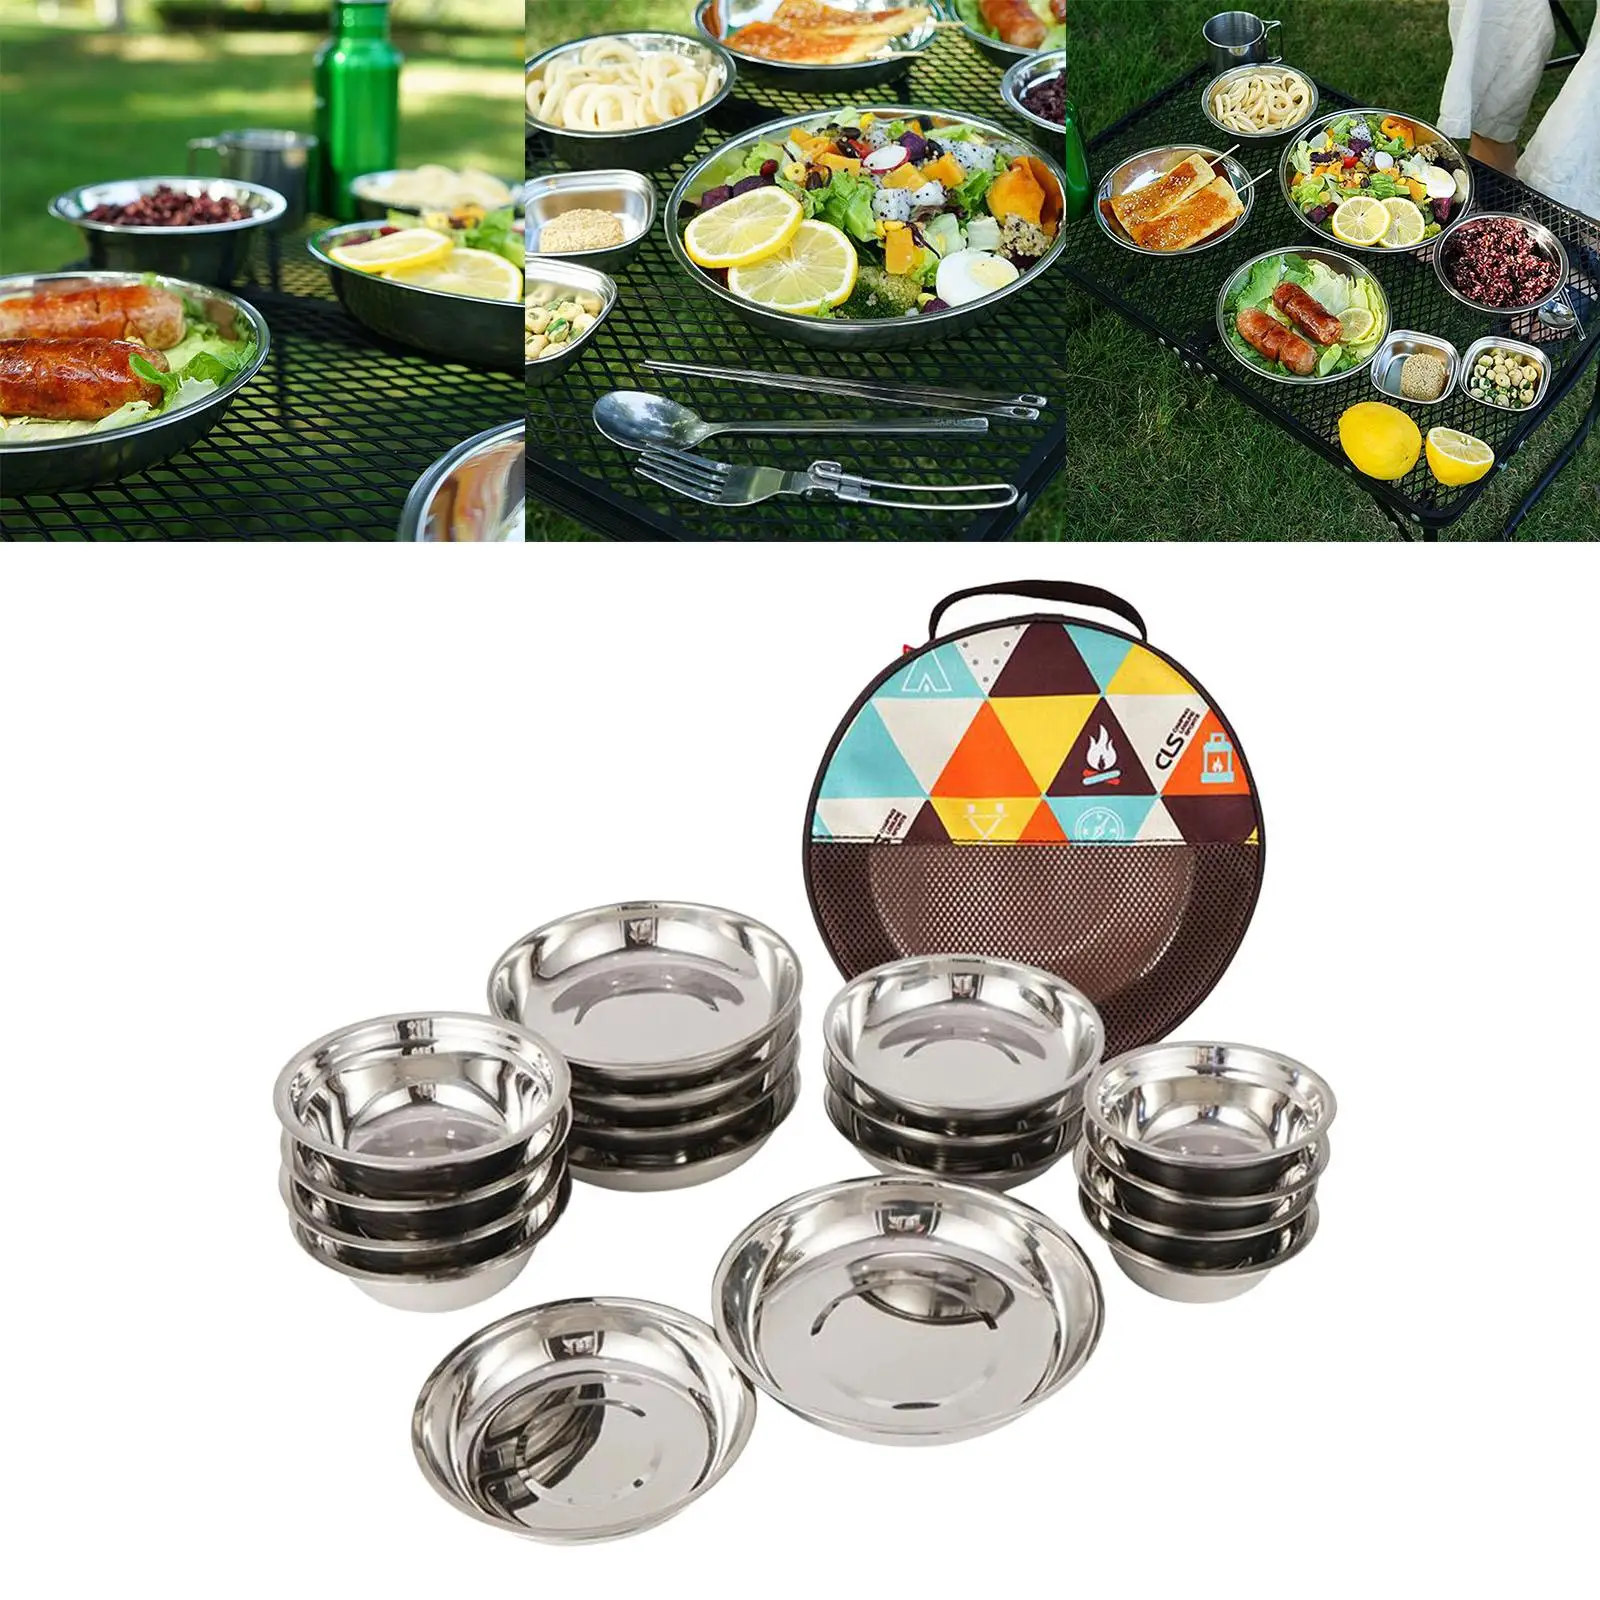 17Pieces Stainless Steel Plates and Bowls Set Small and Large Dinnerware